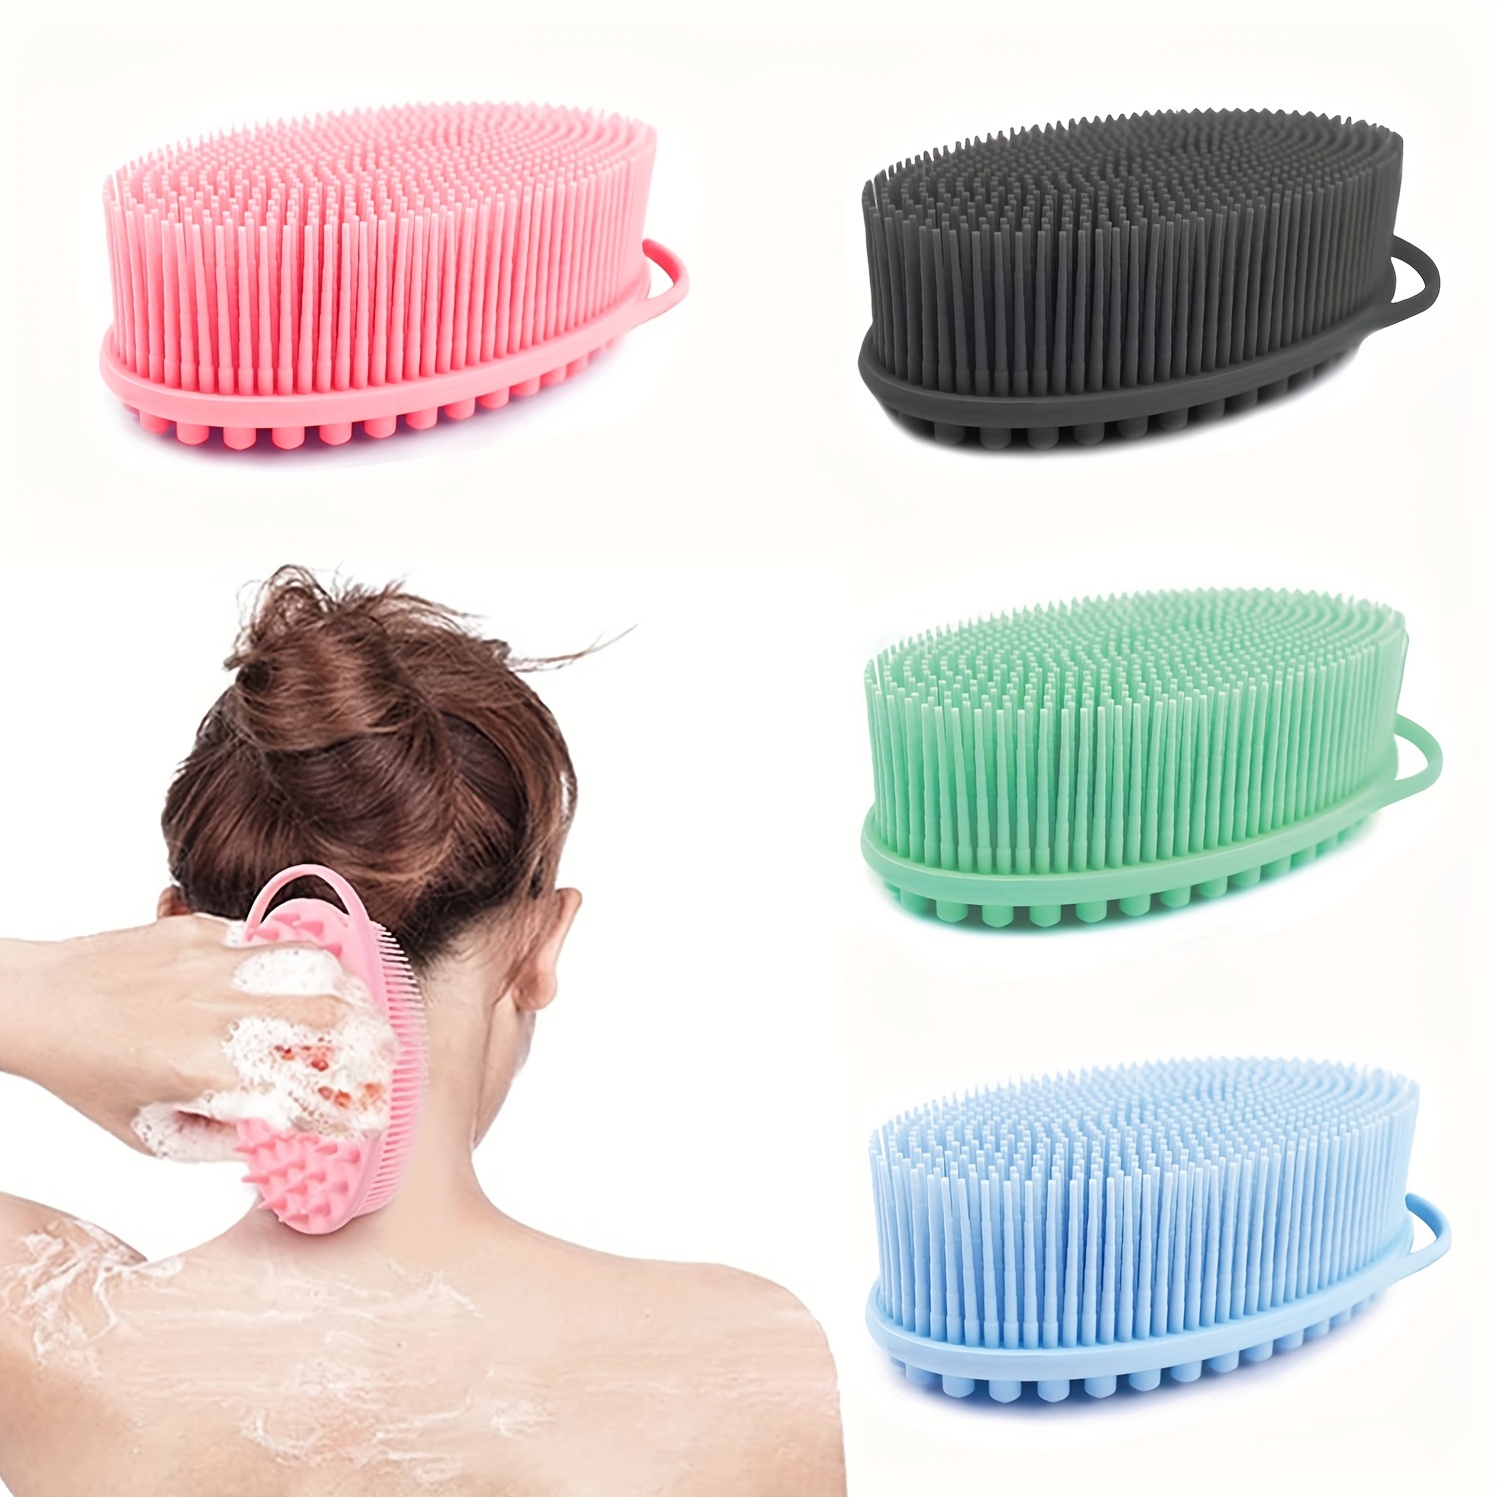 Silicone Body Scrubber Loofah - Set of 3 Soft Exfoliating Body Bath Shower  Scrubber Loofsh Brush for Sensitive Kids Women Men All Kinds of Skin